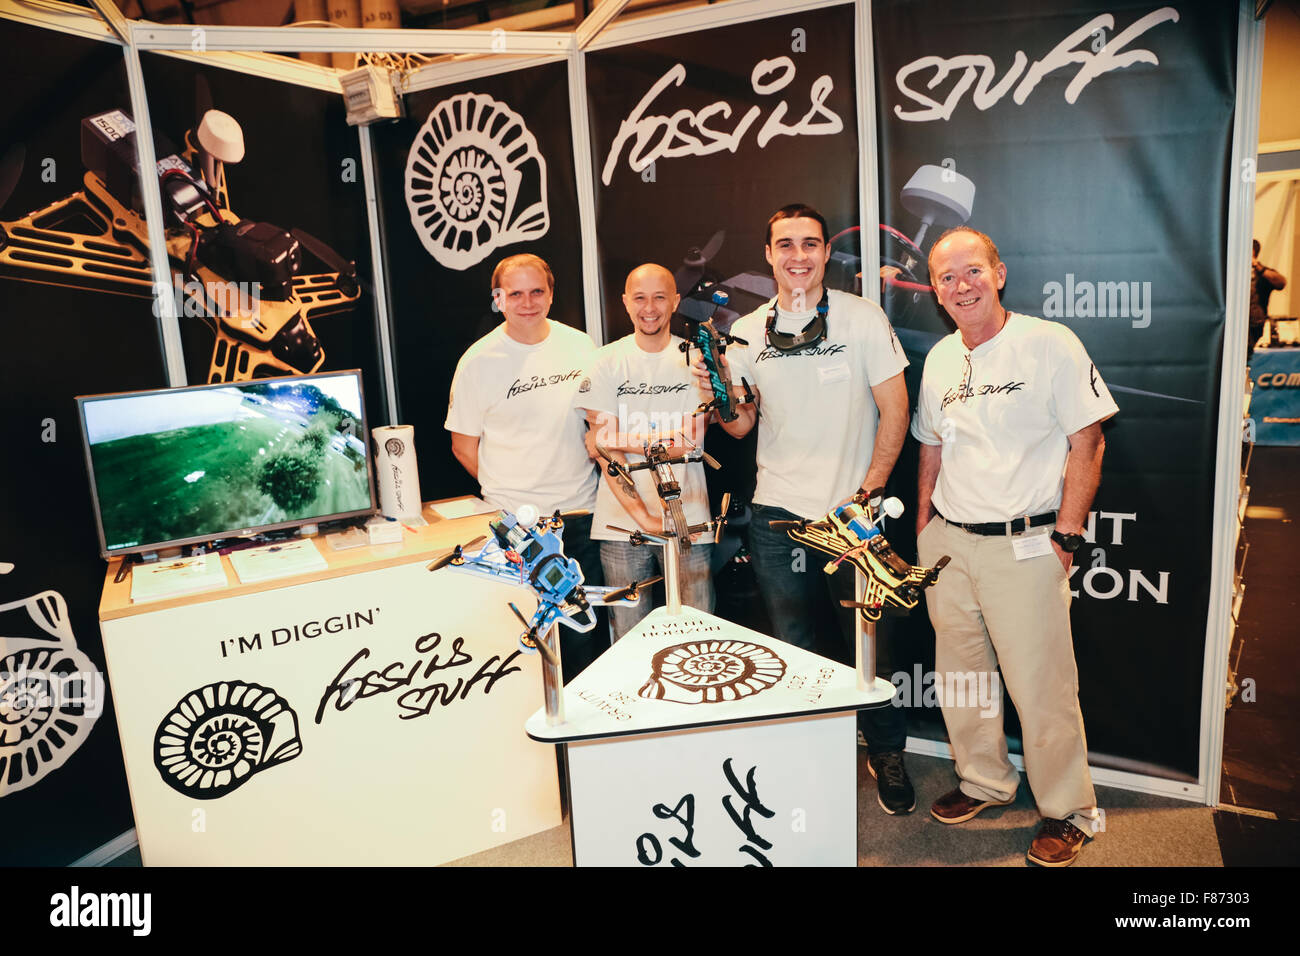 Birmingham, UK. 5th December, 2015. The UK Drone Show consumer drone fair, NEC conference centre, Birmingham, UK #ukdroneshow.  Pictured - Fossils Stuff's FPV (first person view) drone racing team pilots (l-r) Chris Weston, Jonny Banton and Tony  Marchant, with (r) Martin Rye, owner of Fossils Stuff.  Jonny is holding the new, as yet unreleased racing frame,  the 'Event Horizon'. Credit:  David Stock/Alamy Live News Stock Photo